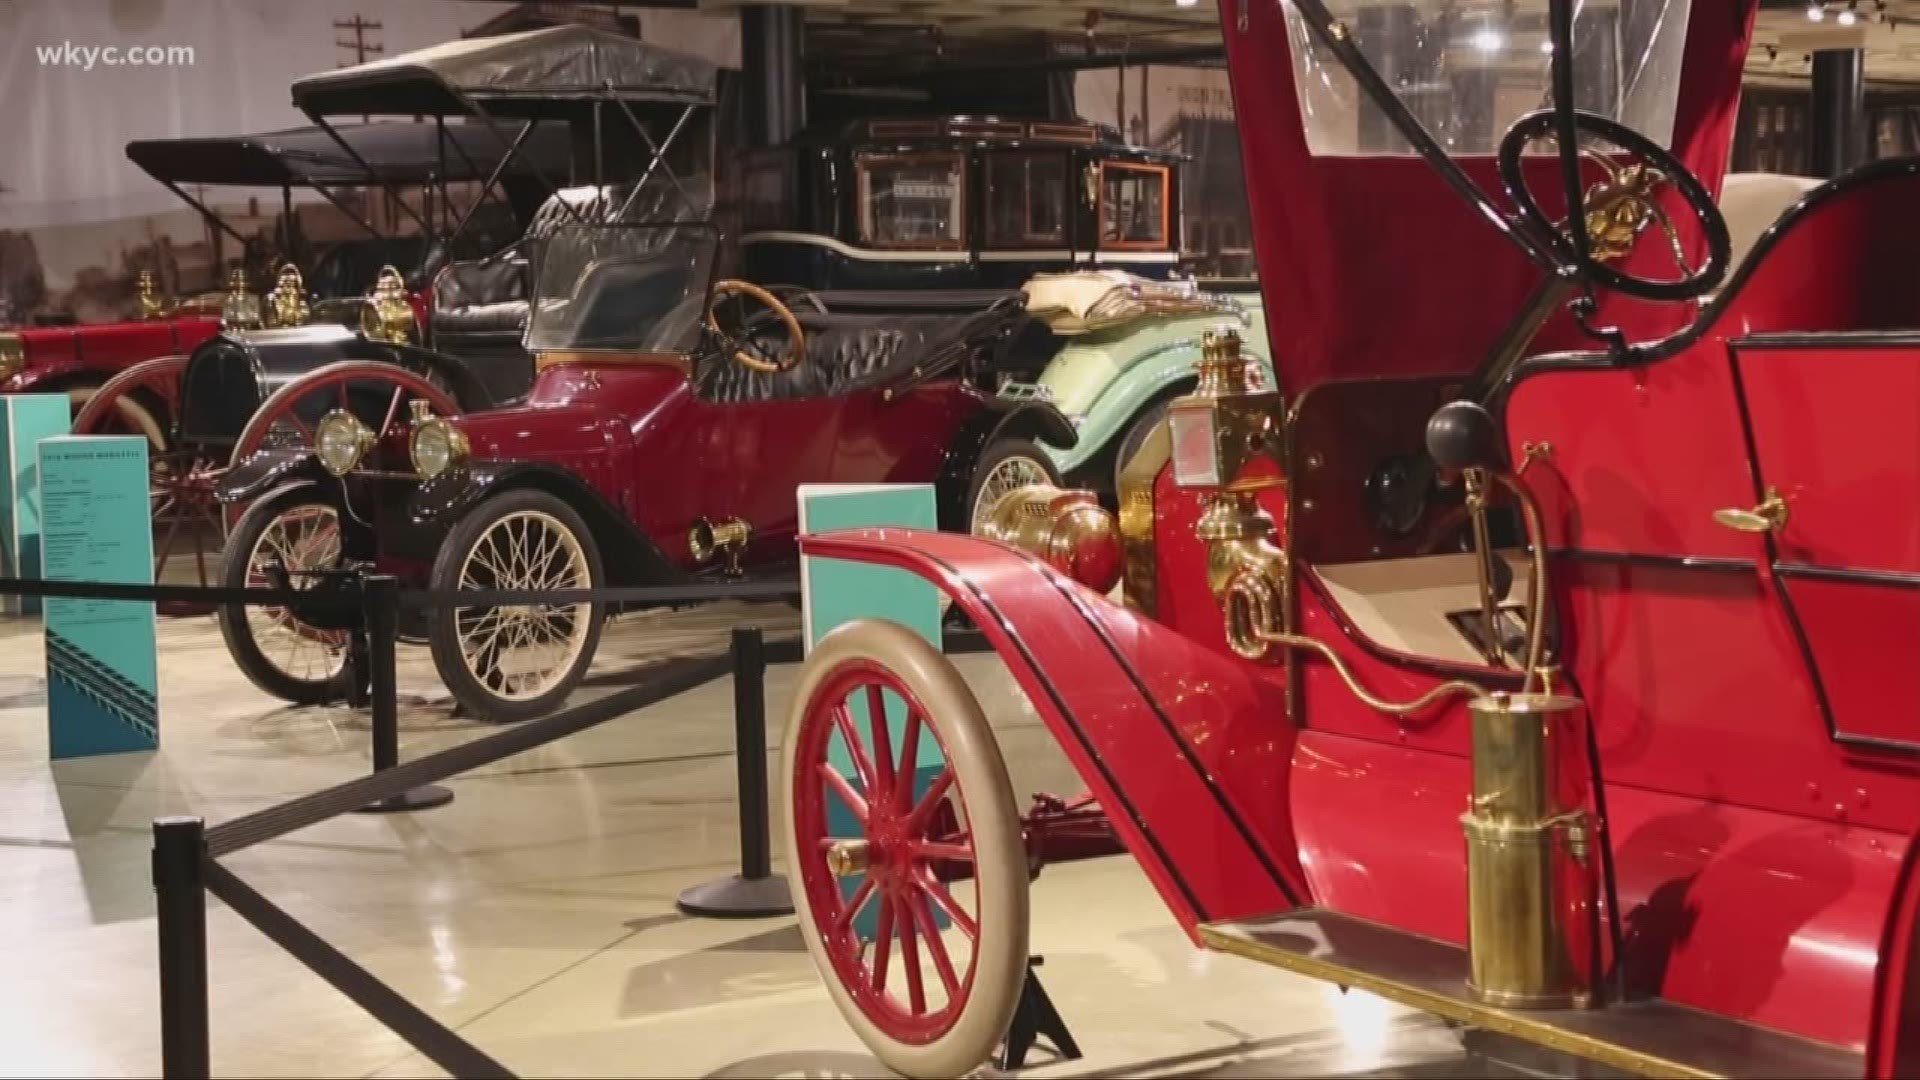 Cleveland was the car capital from 1890 to 1910